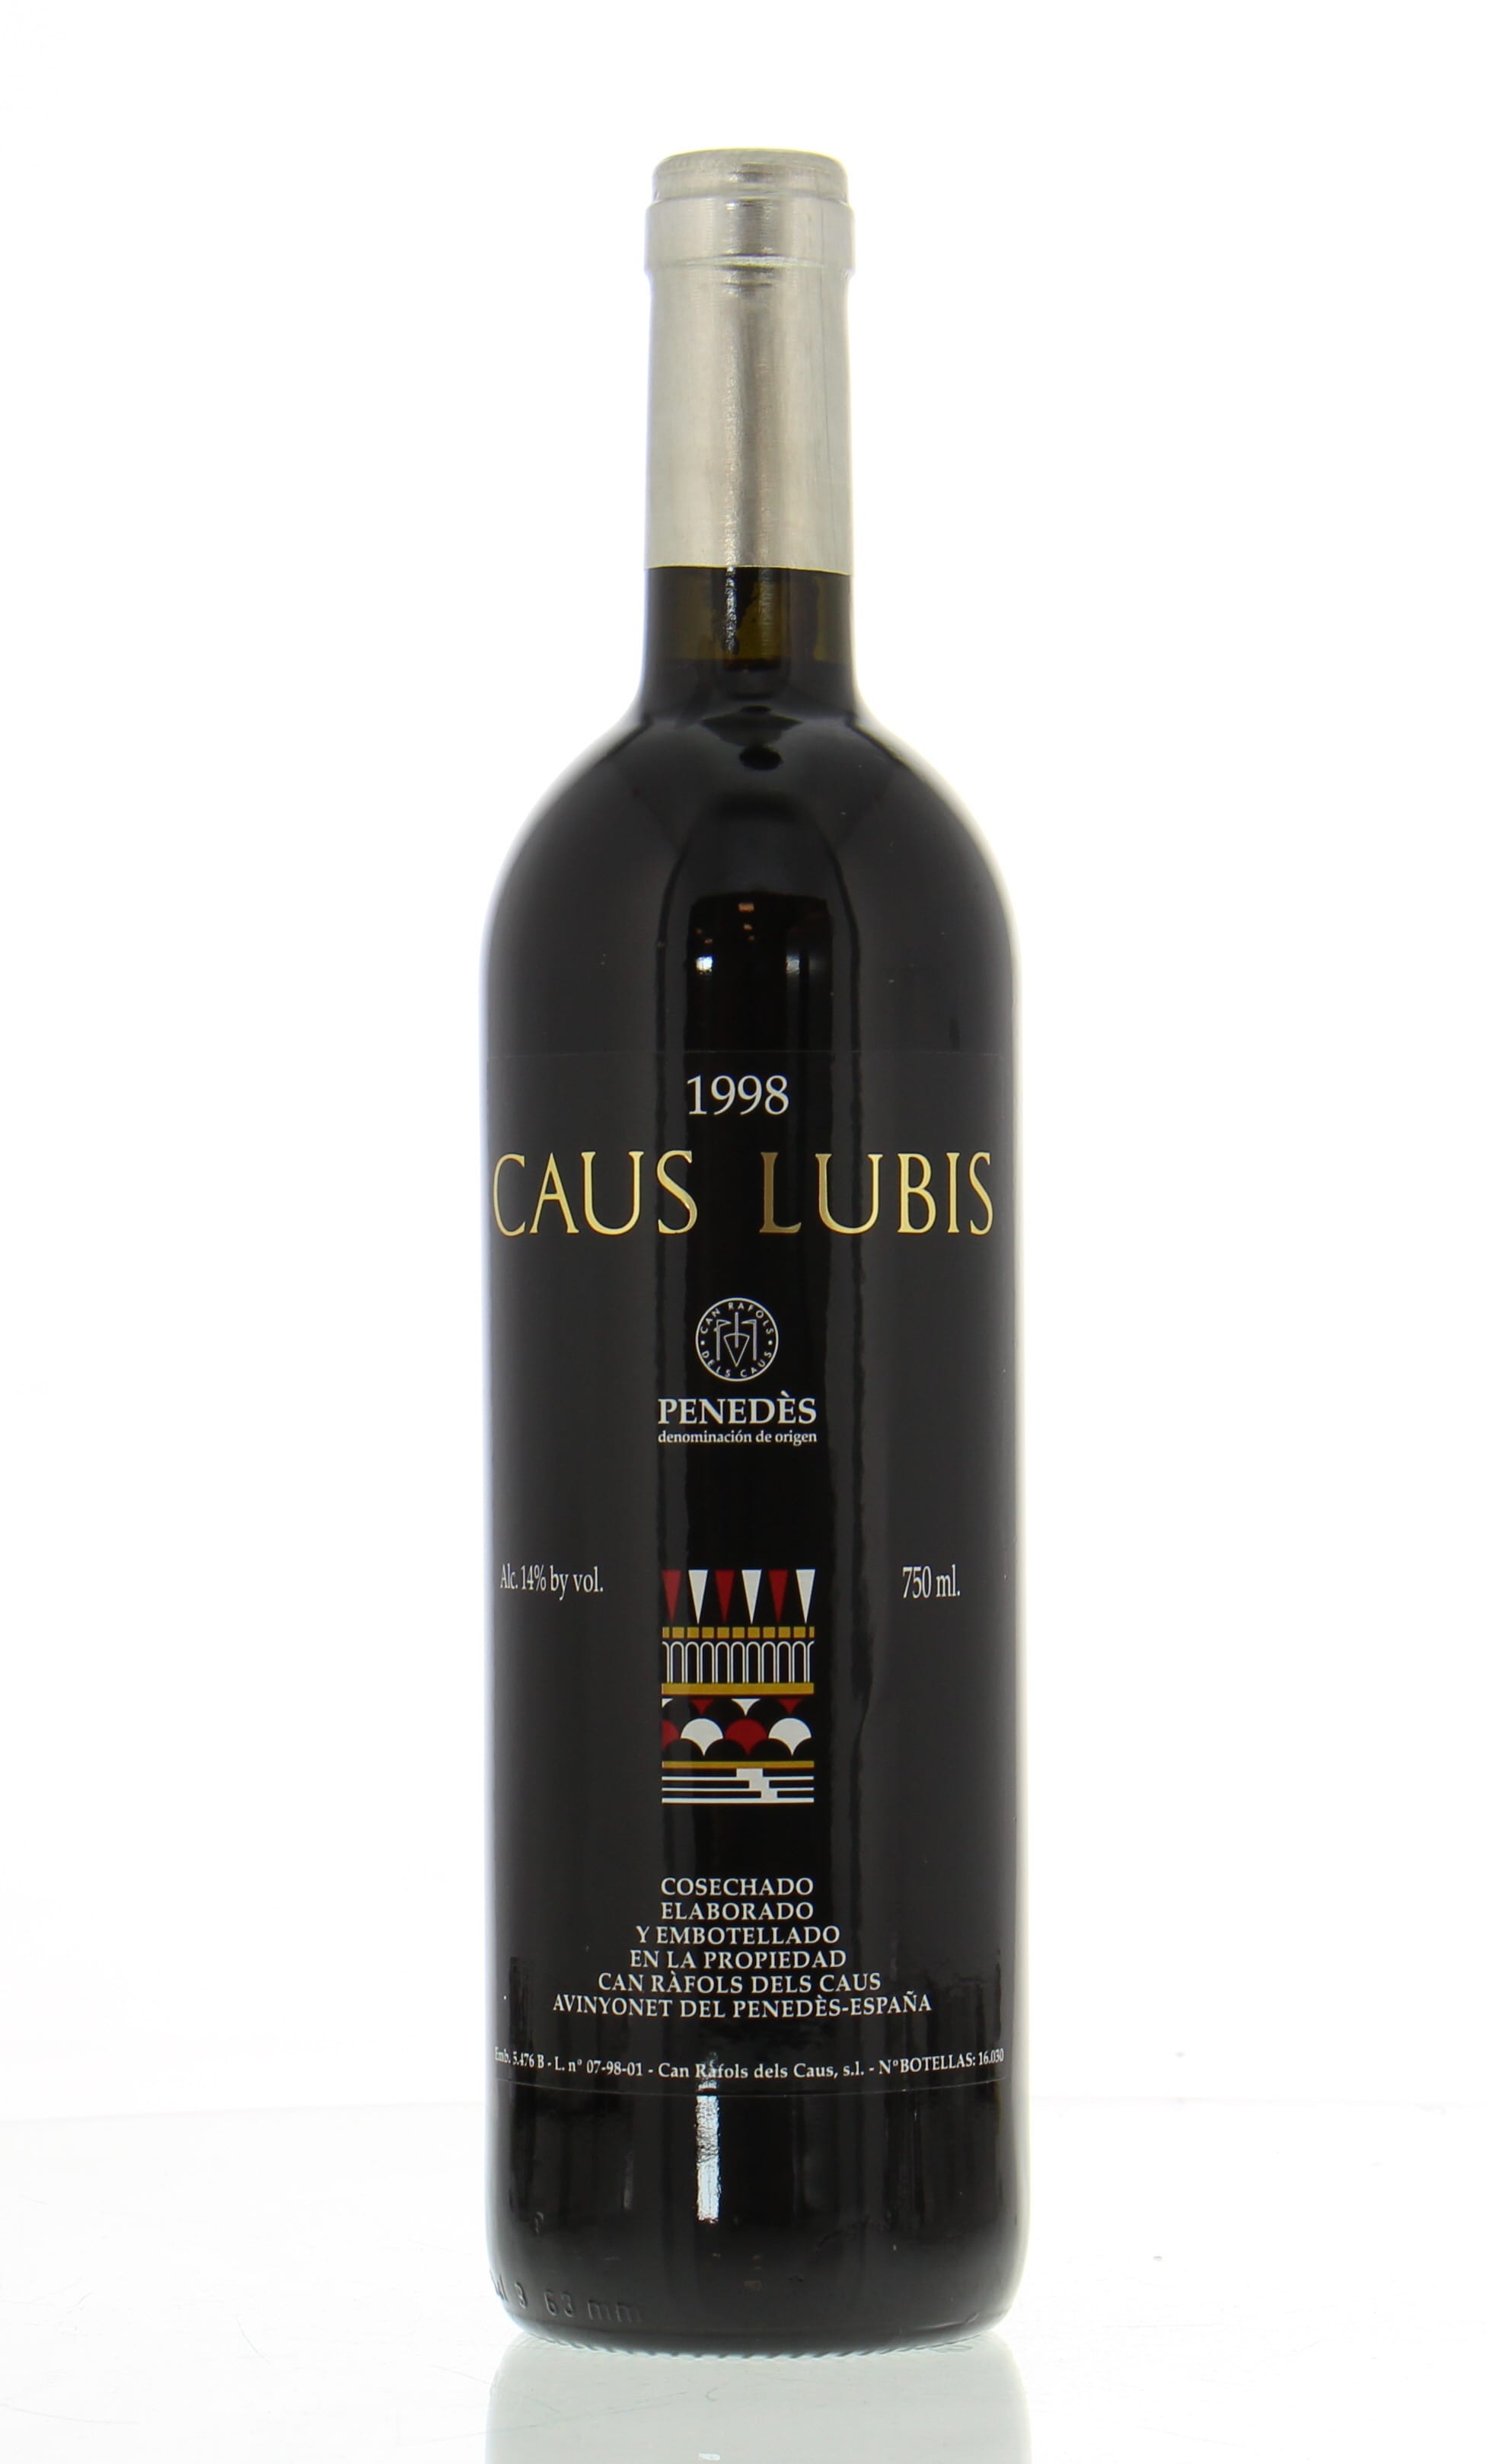 Can Rafols dels Caus - Caus Lubis 1998 Perfect